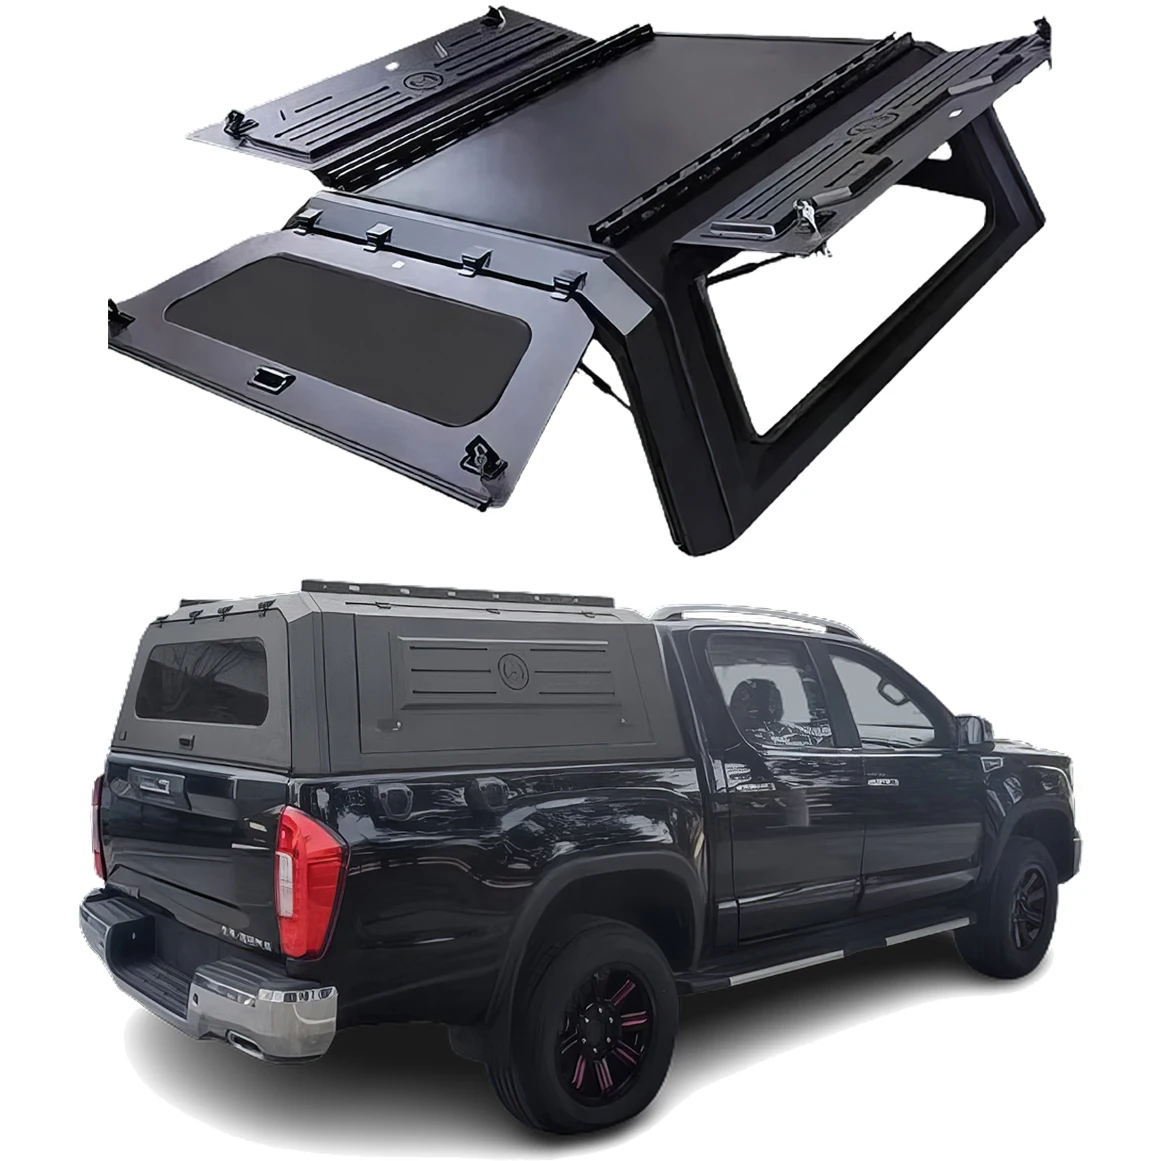 

Hot selling Truck Camper Canopy pickup truck canopy hardtop for Ford F150 Raptor Ranger Toyotas Hilux Tacoma Tundra Dodge Ram